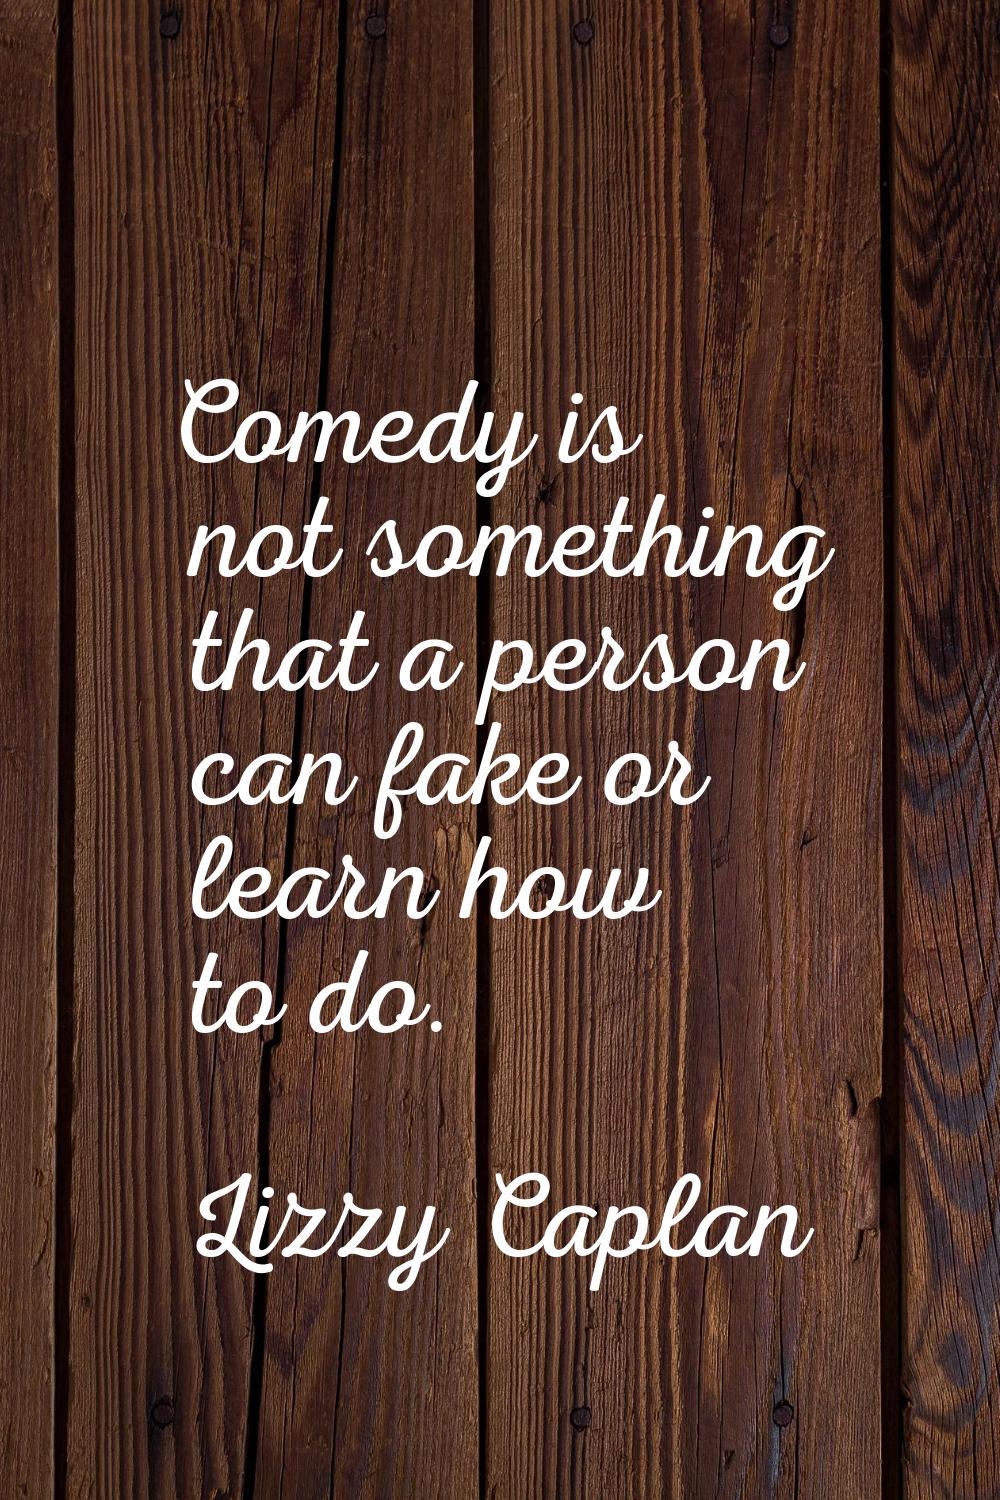 Comedy is not something that a person can fake or learn how to do.